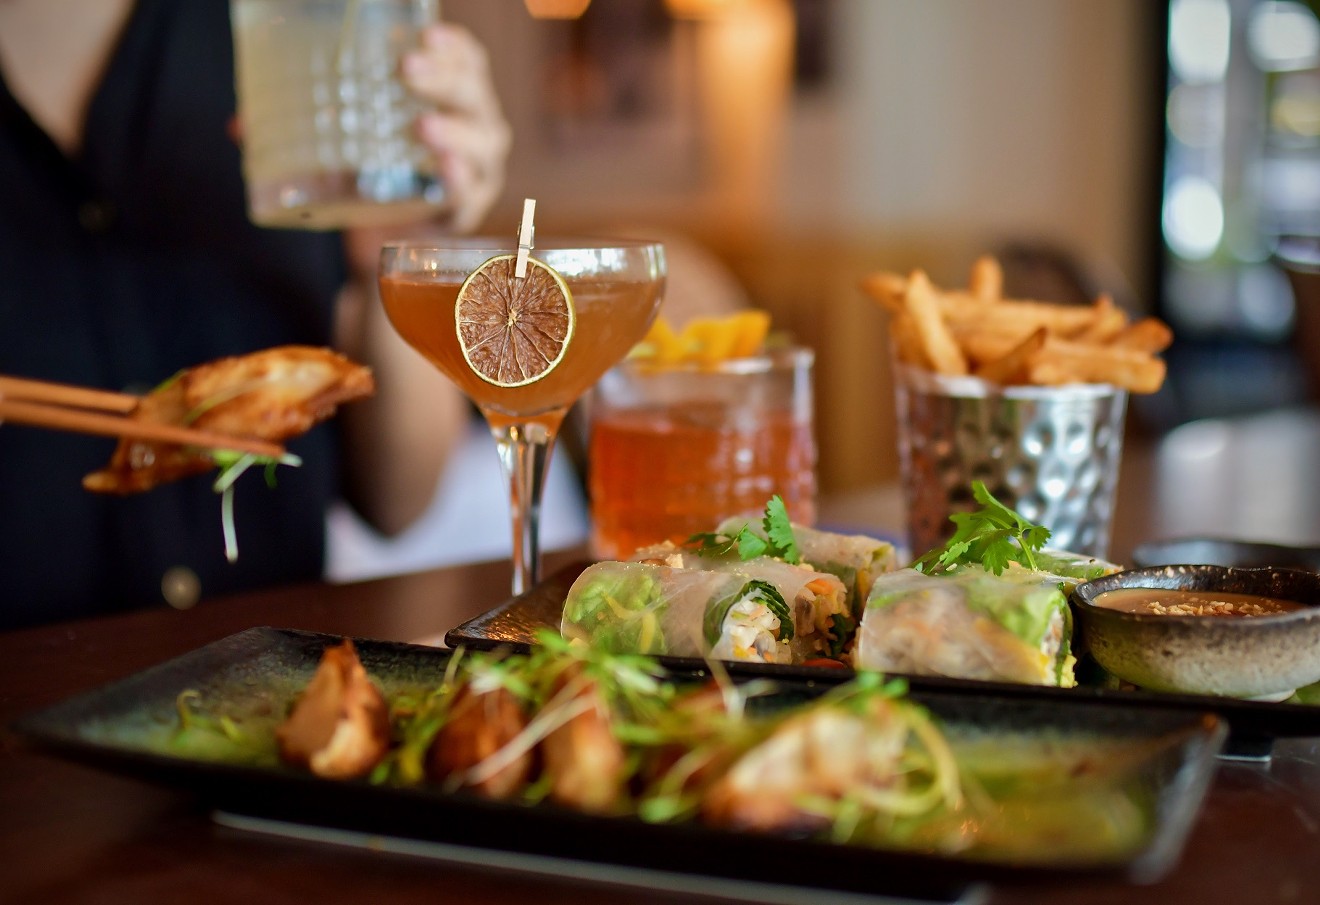 Sip, nosh and unwind with Le Colonial's revamped Social Hour menu.